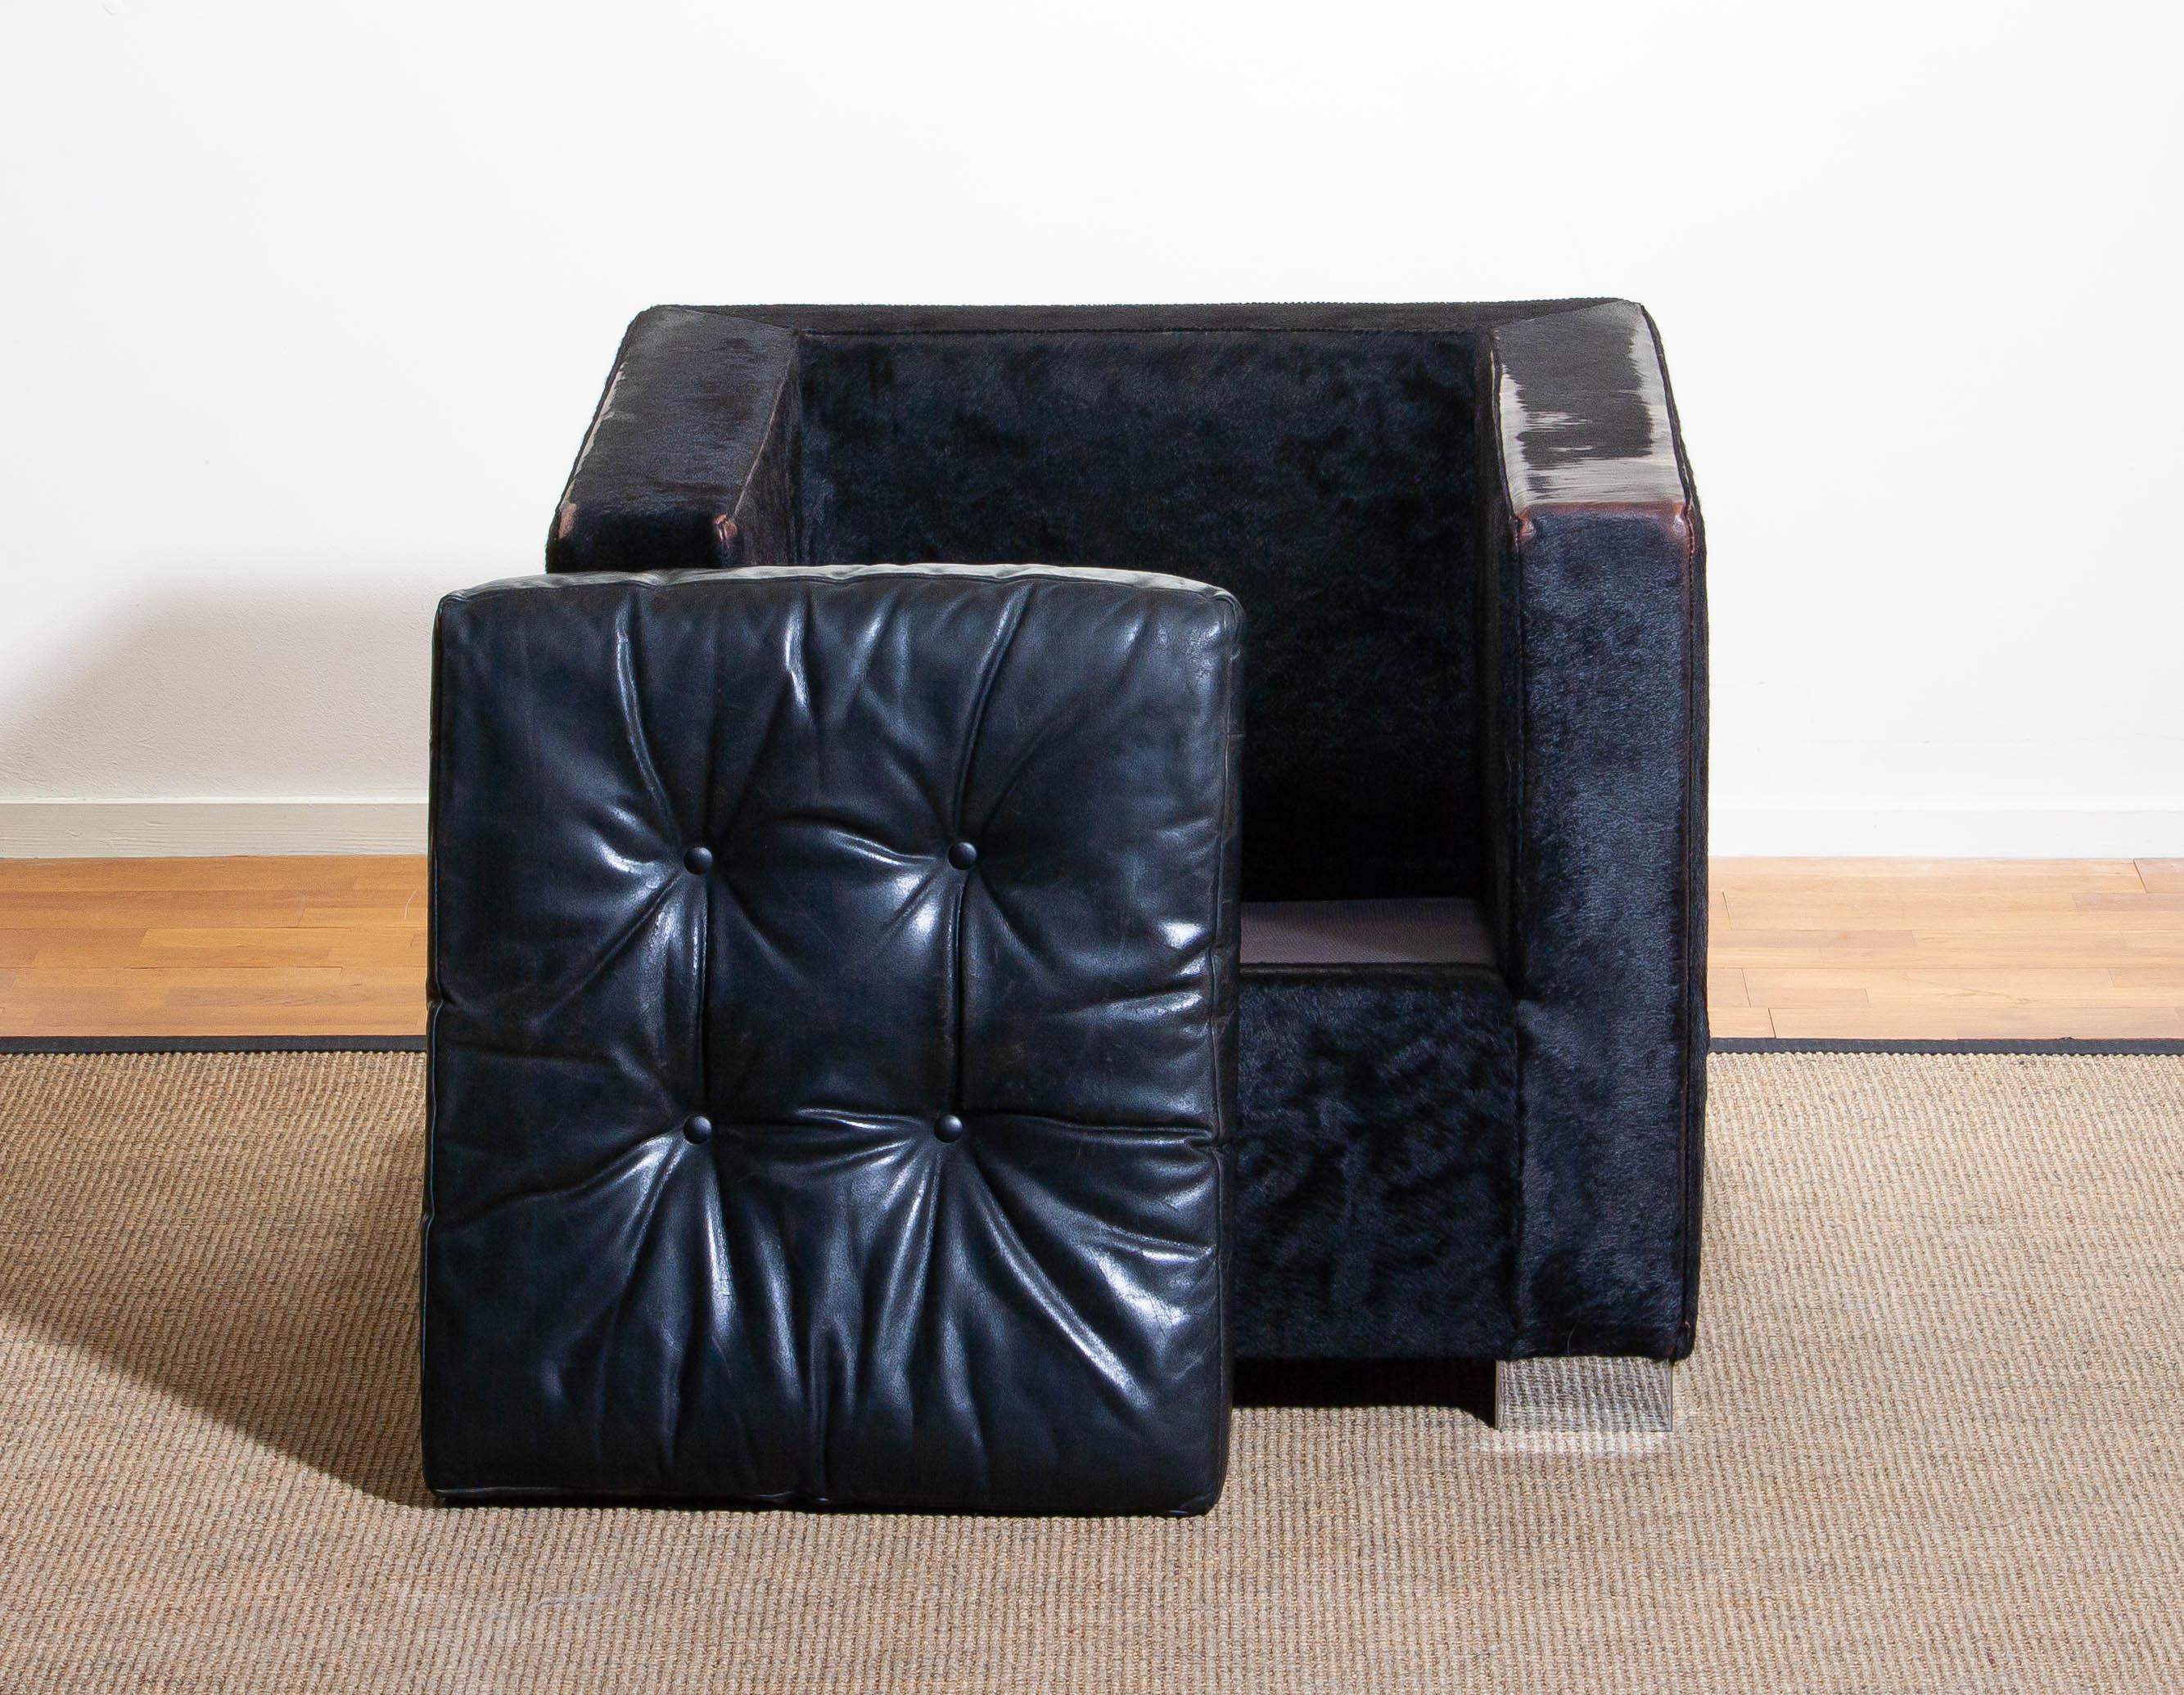 1990s, Black Lounge Chair in Pony and Leather by Rodolfo Dordoni for Minotti (Pelz)